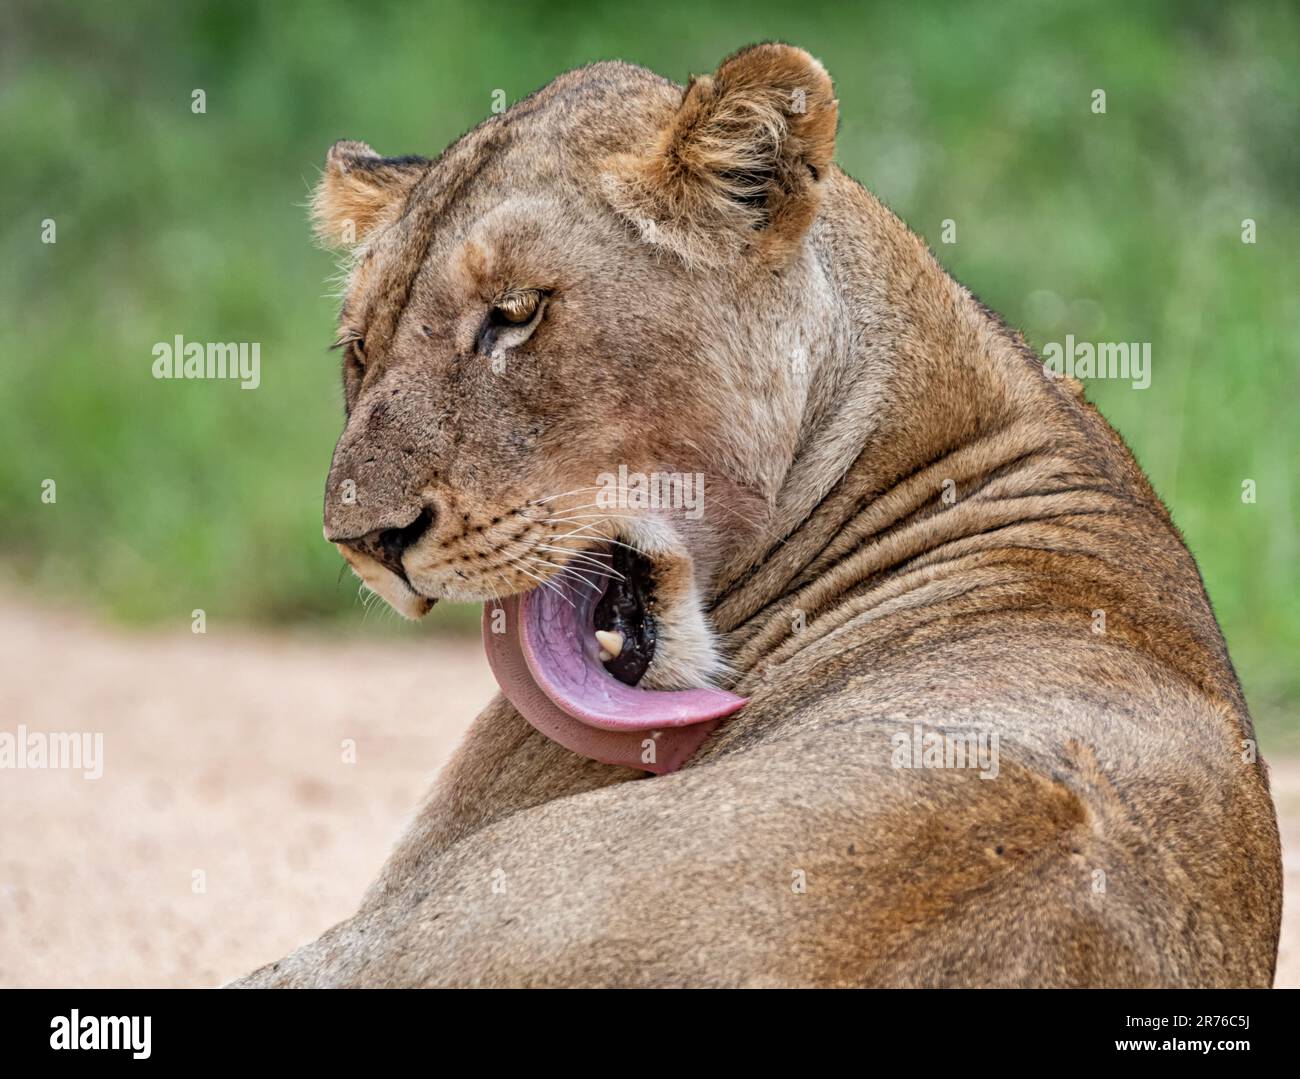 A female Lion grooming herself in Southern African savannah Stock Photo